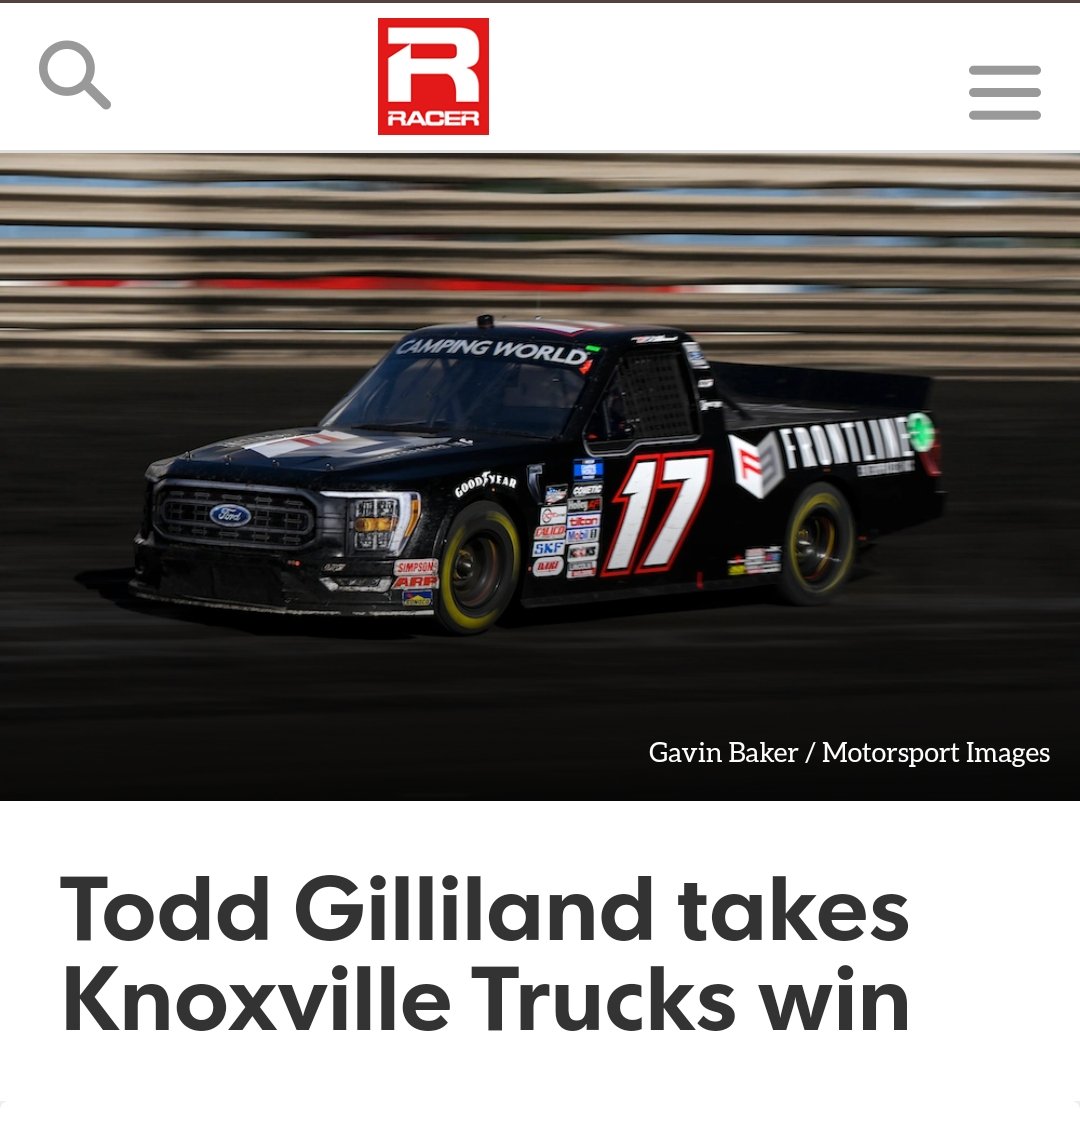 Gillland wins NASCAR dirt truck race in Knoxville